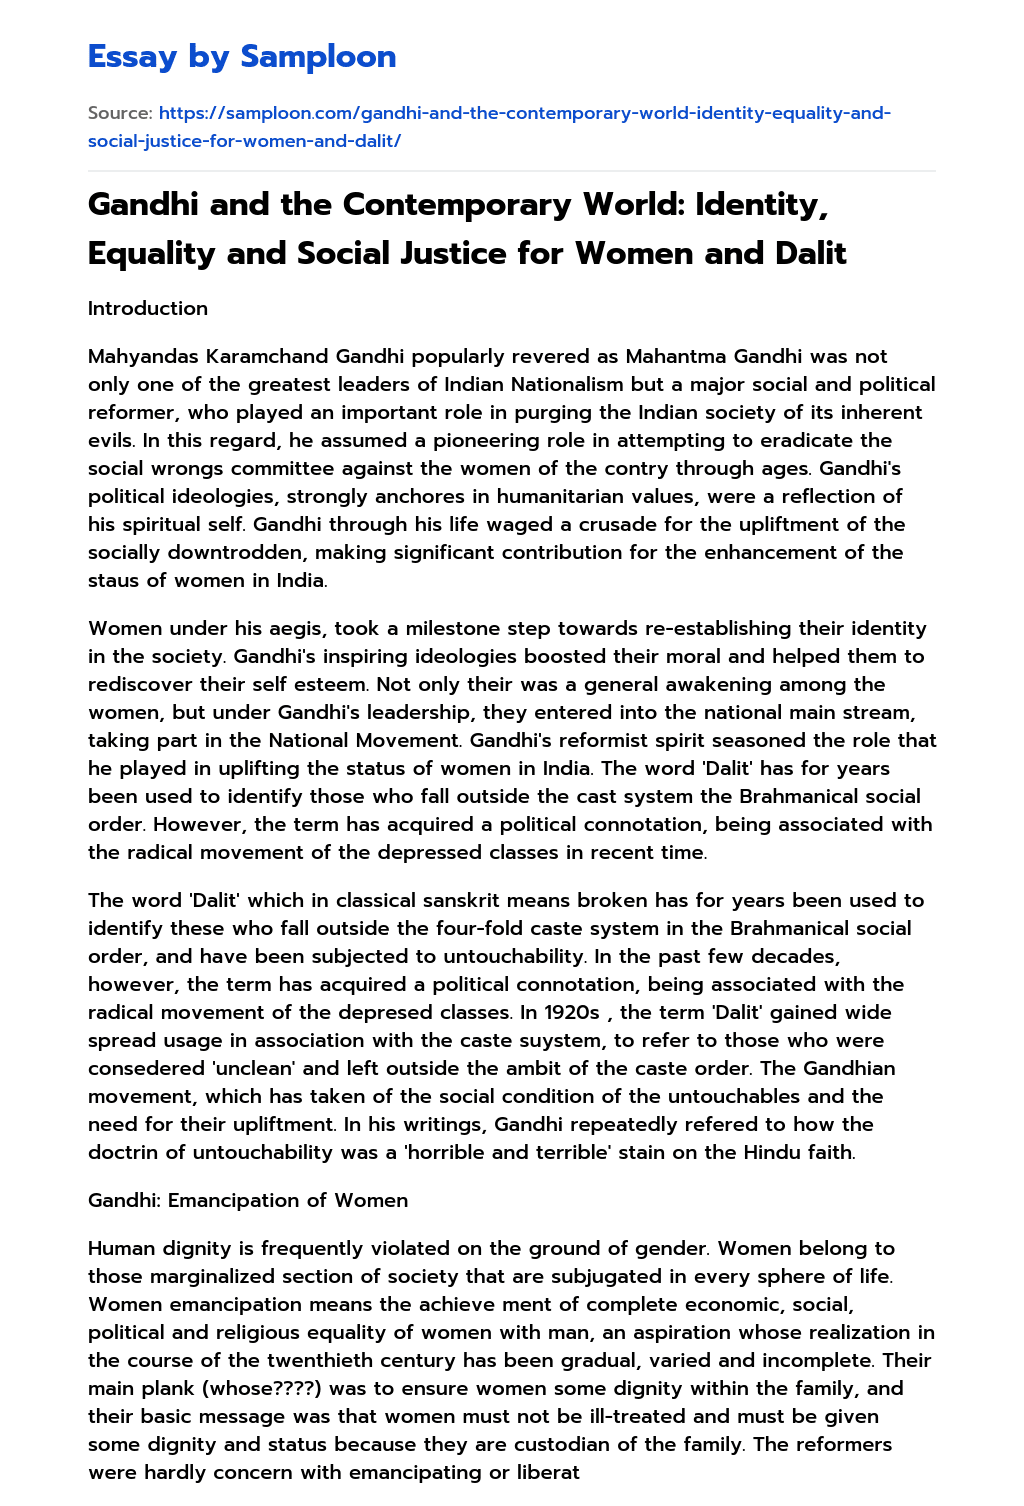 Gandhi and the Contemporary World: Identity, Equality and Social Justice for Women and Dalit essay